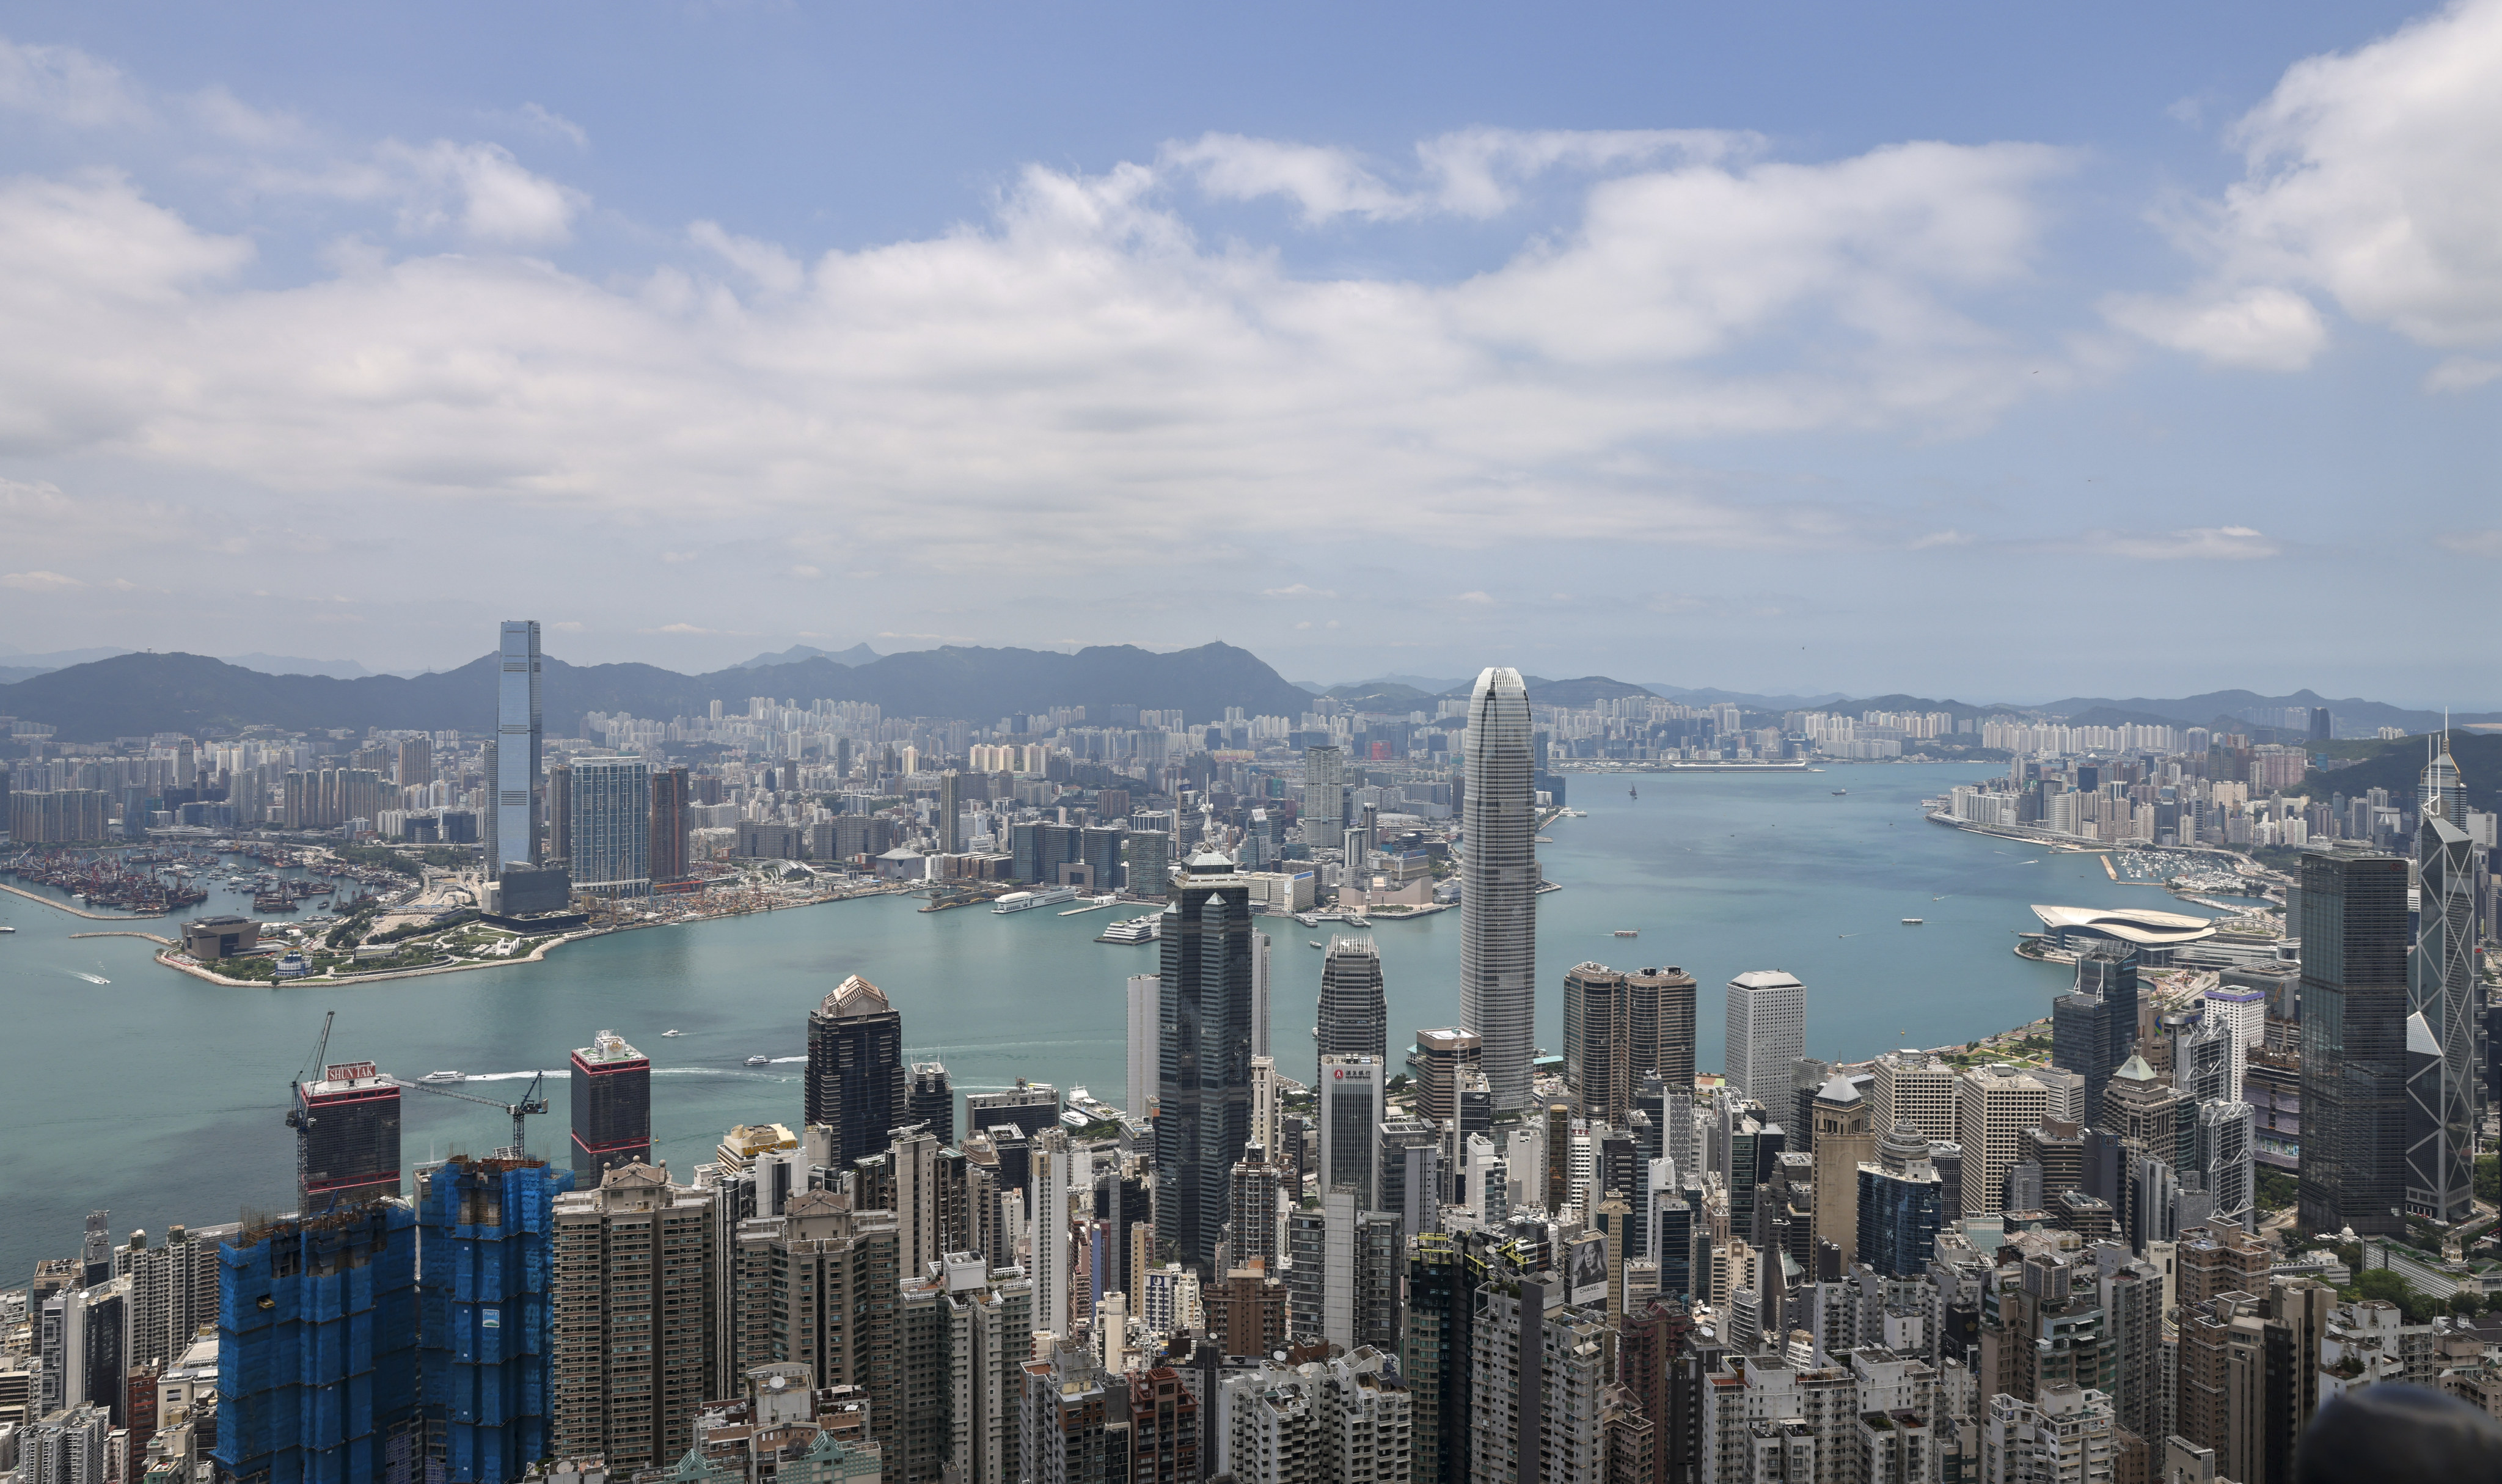 With its sound legal system, Hong Kong is well-placed to shape an intellectual property system of international standards for the Greater Bay Area. Photo: K.Y. Cheng